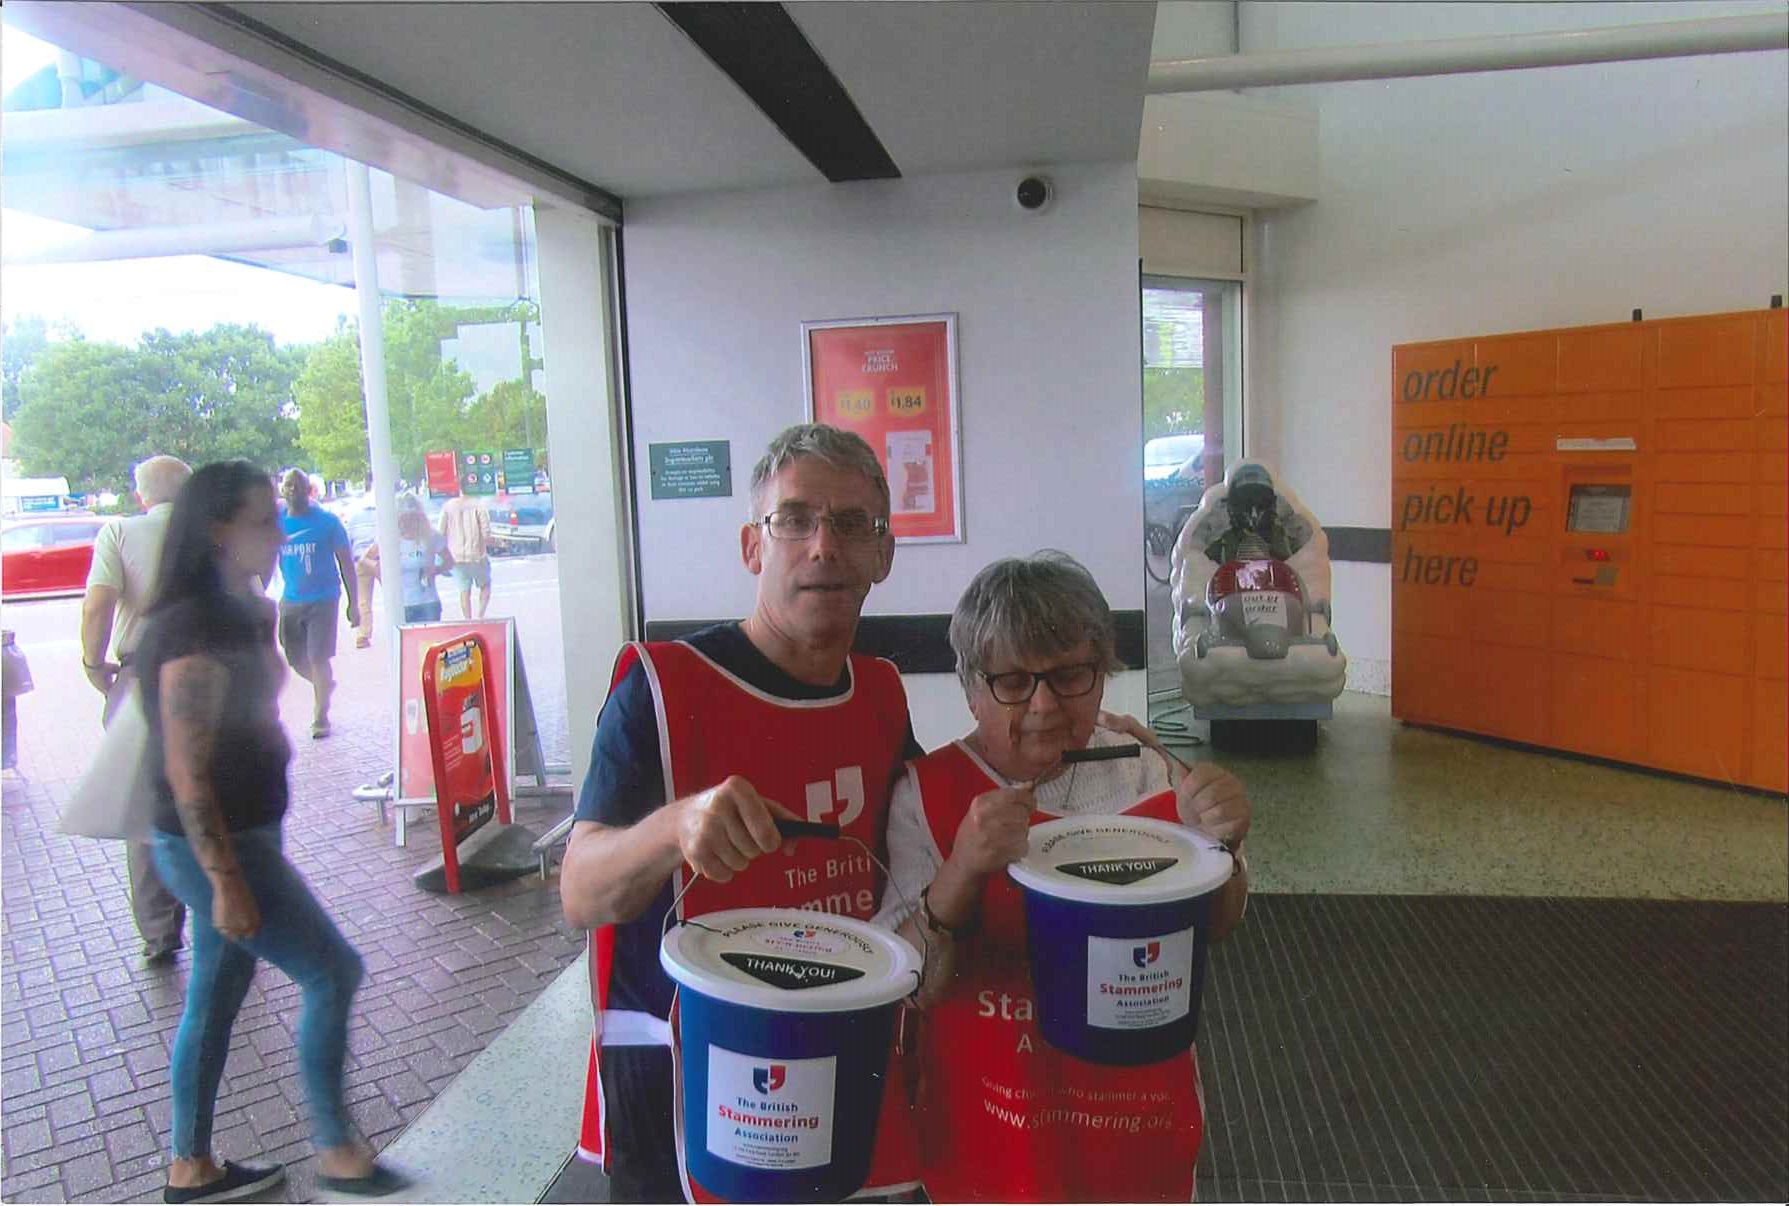 John fundraising at a supermarket with wife Melanie